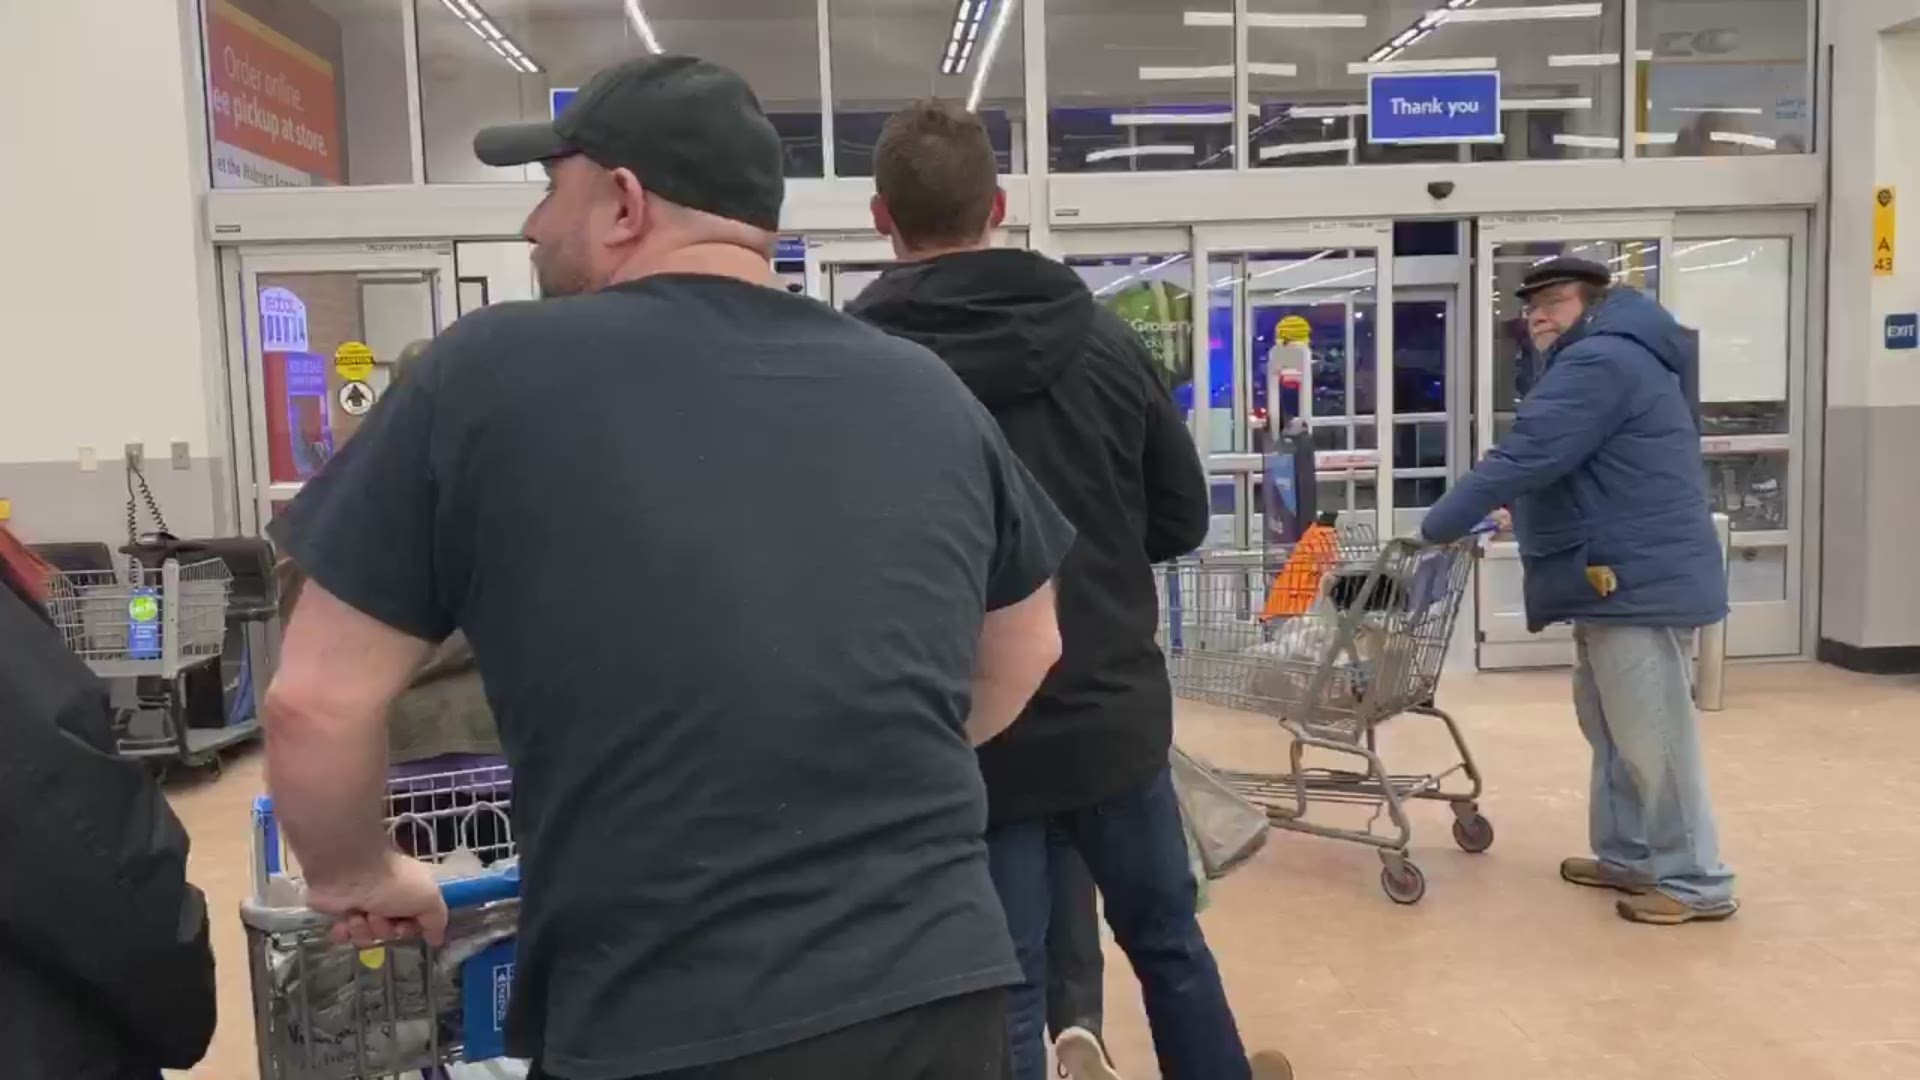 Customers of the Scarborough Walmart were in lockdown because of the shooting